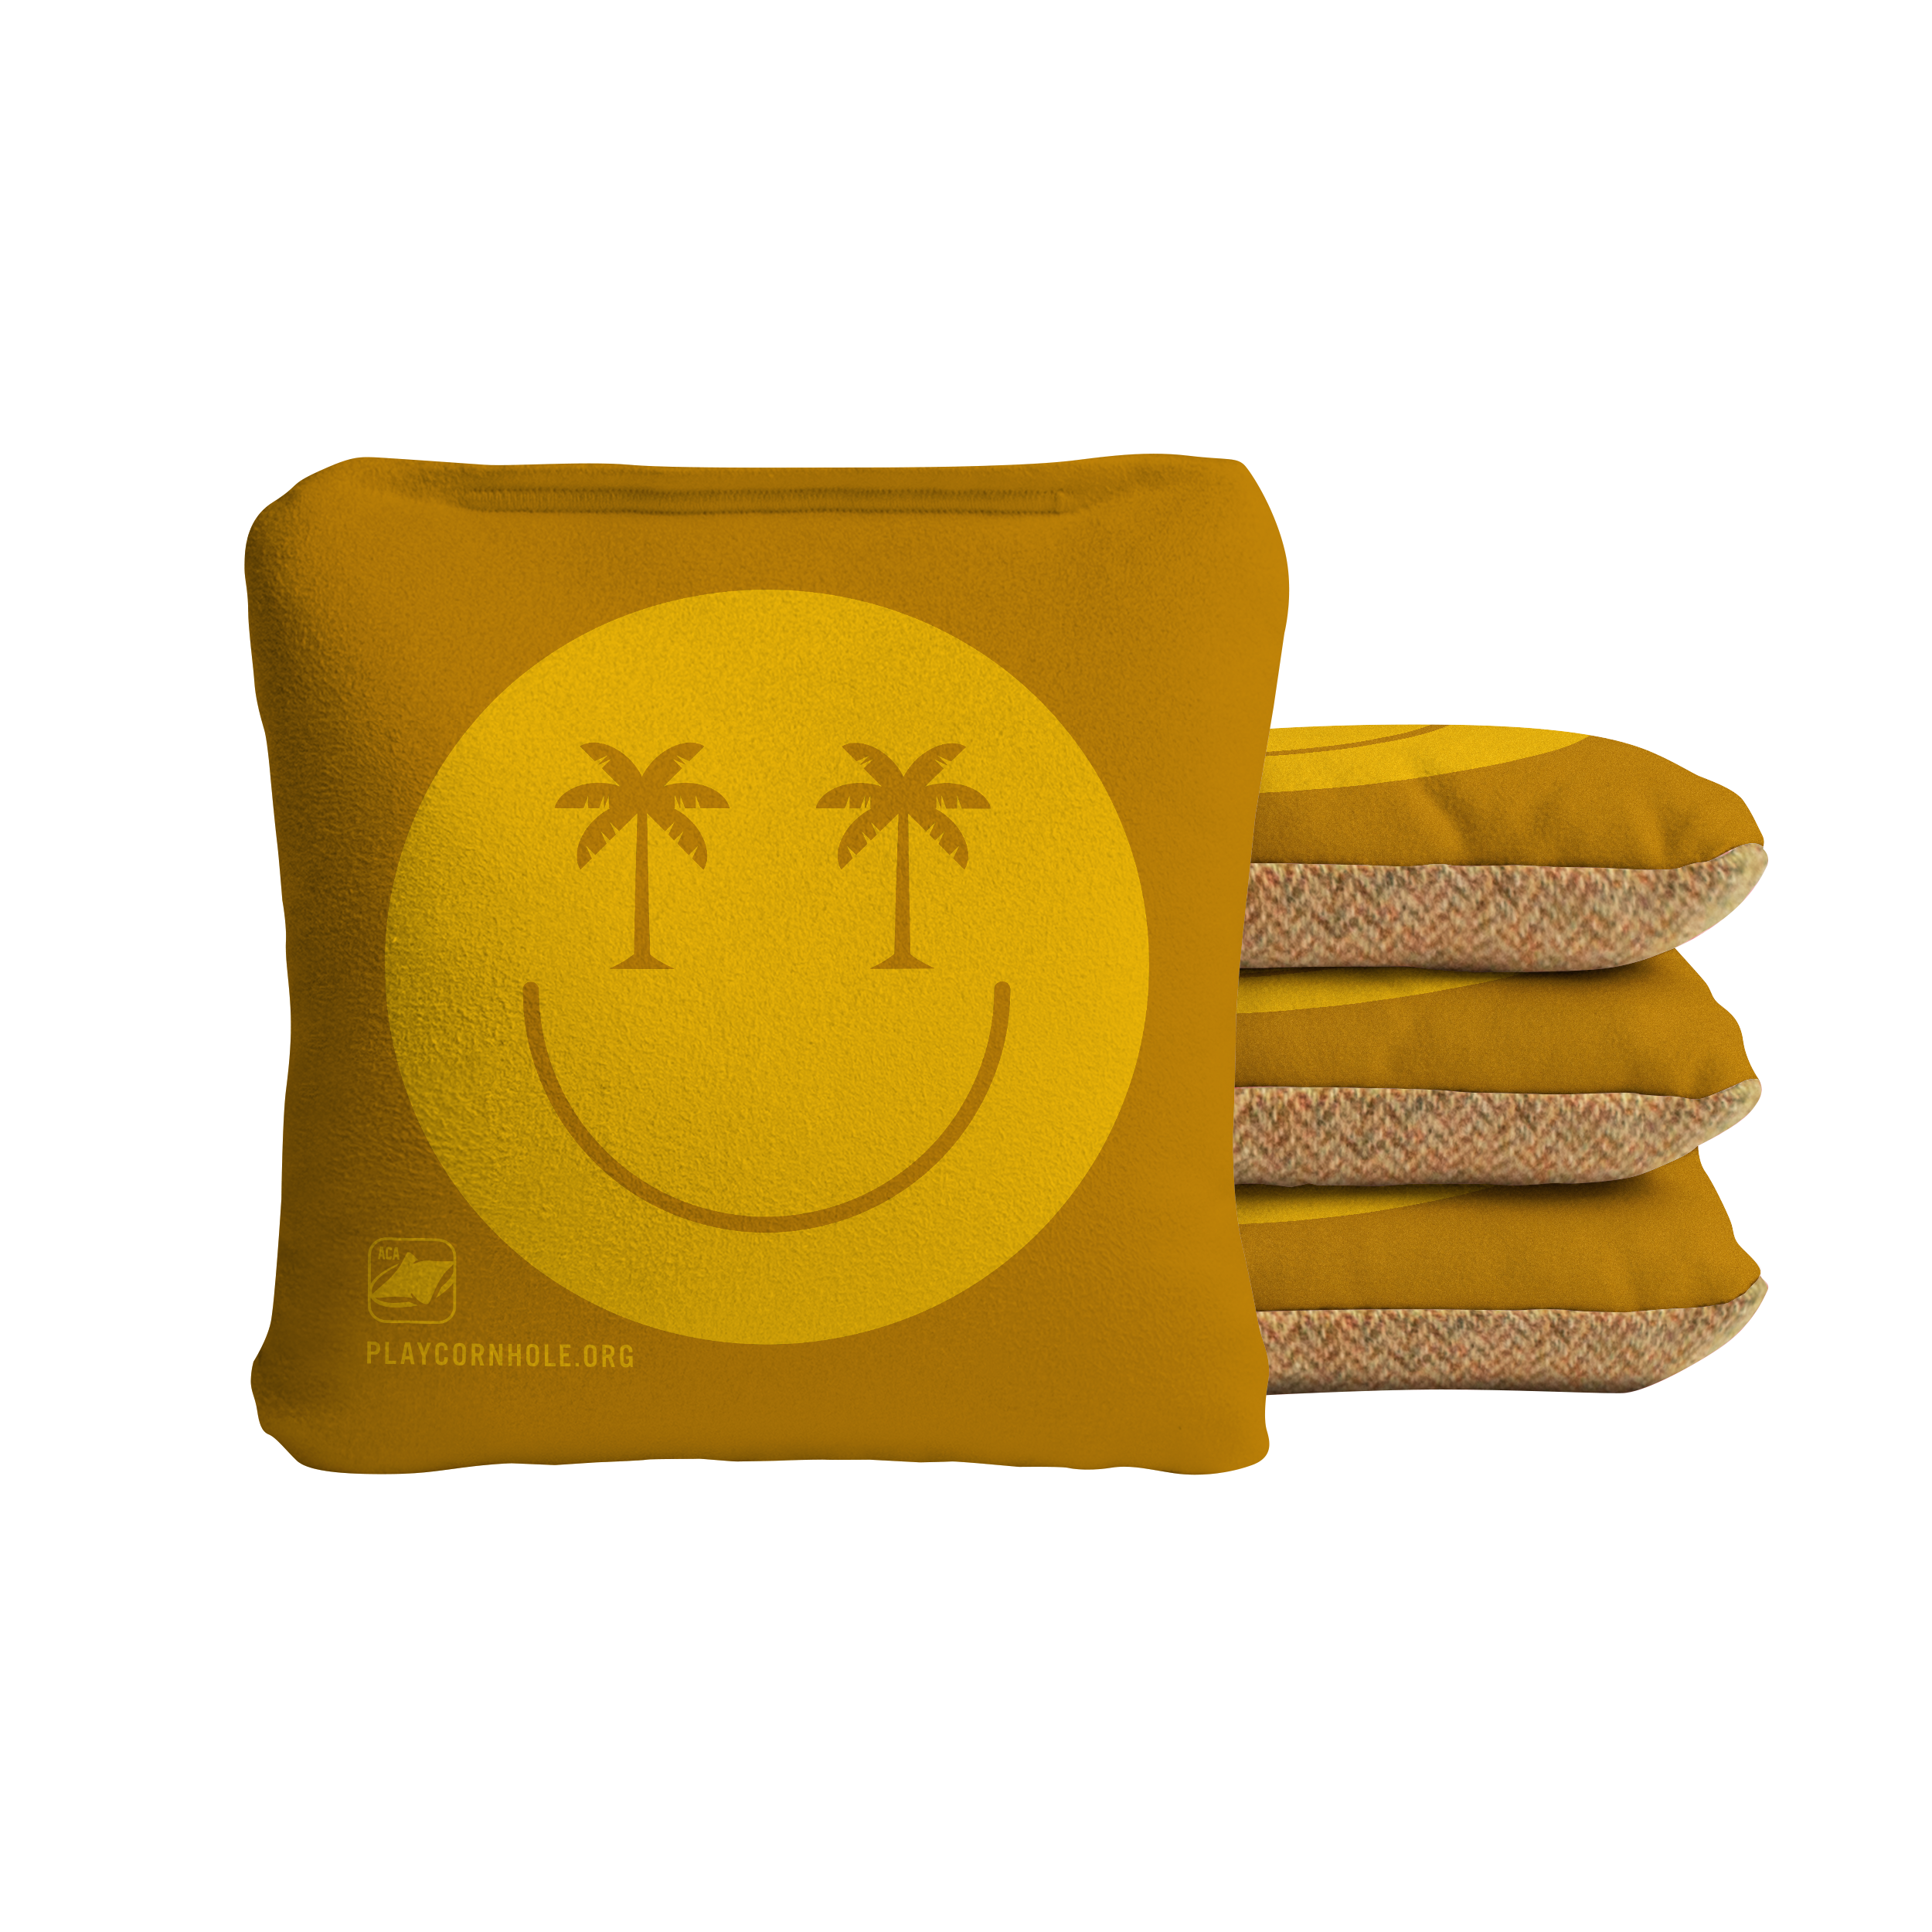 6-in Synergy Soft Smiley Palm Professional Regulation Cornhole Bags